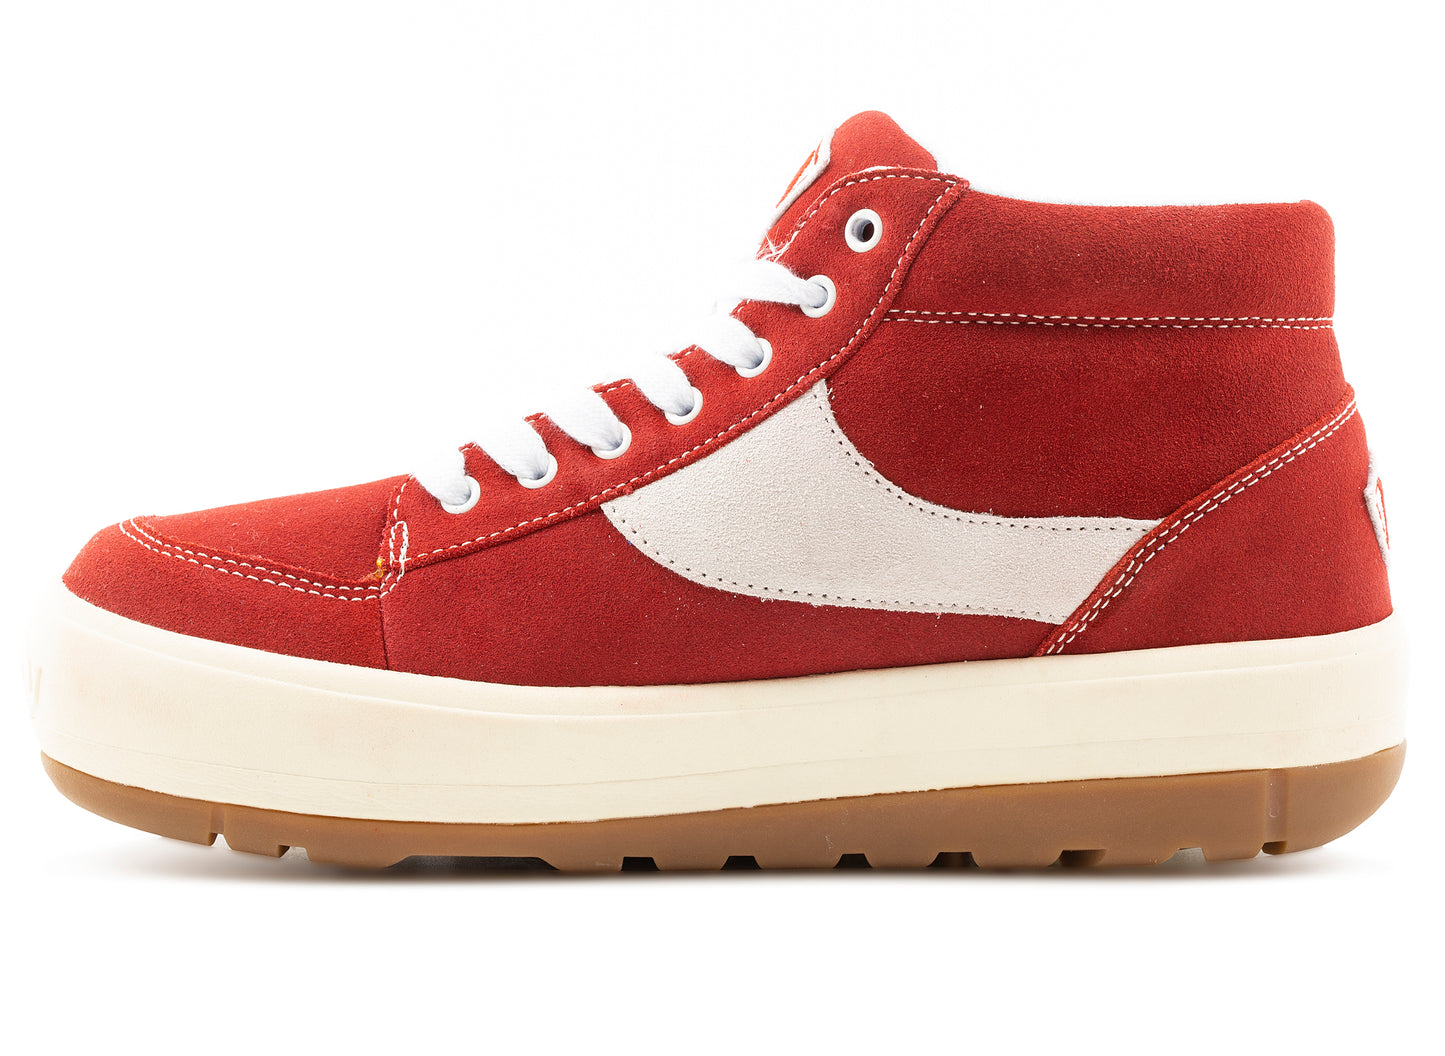 Northwave Expresso Chili Suede Sneakers in Red